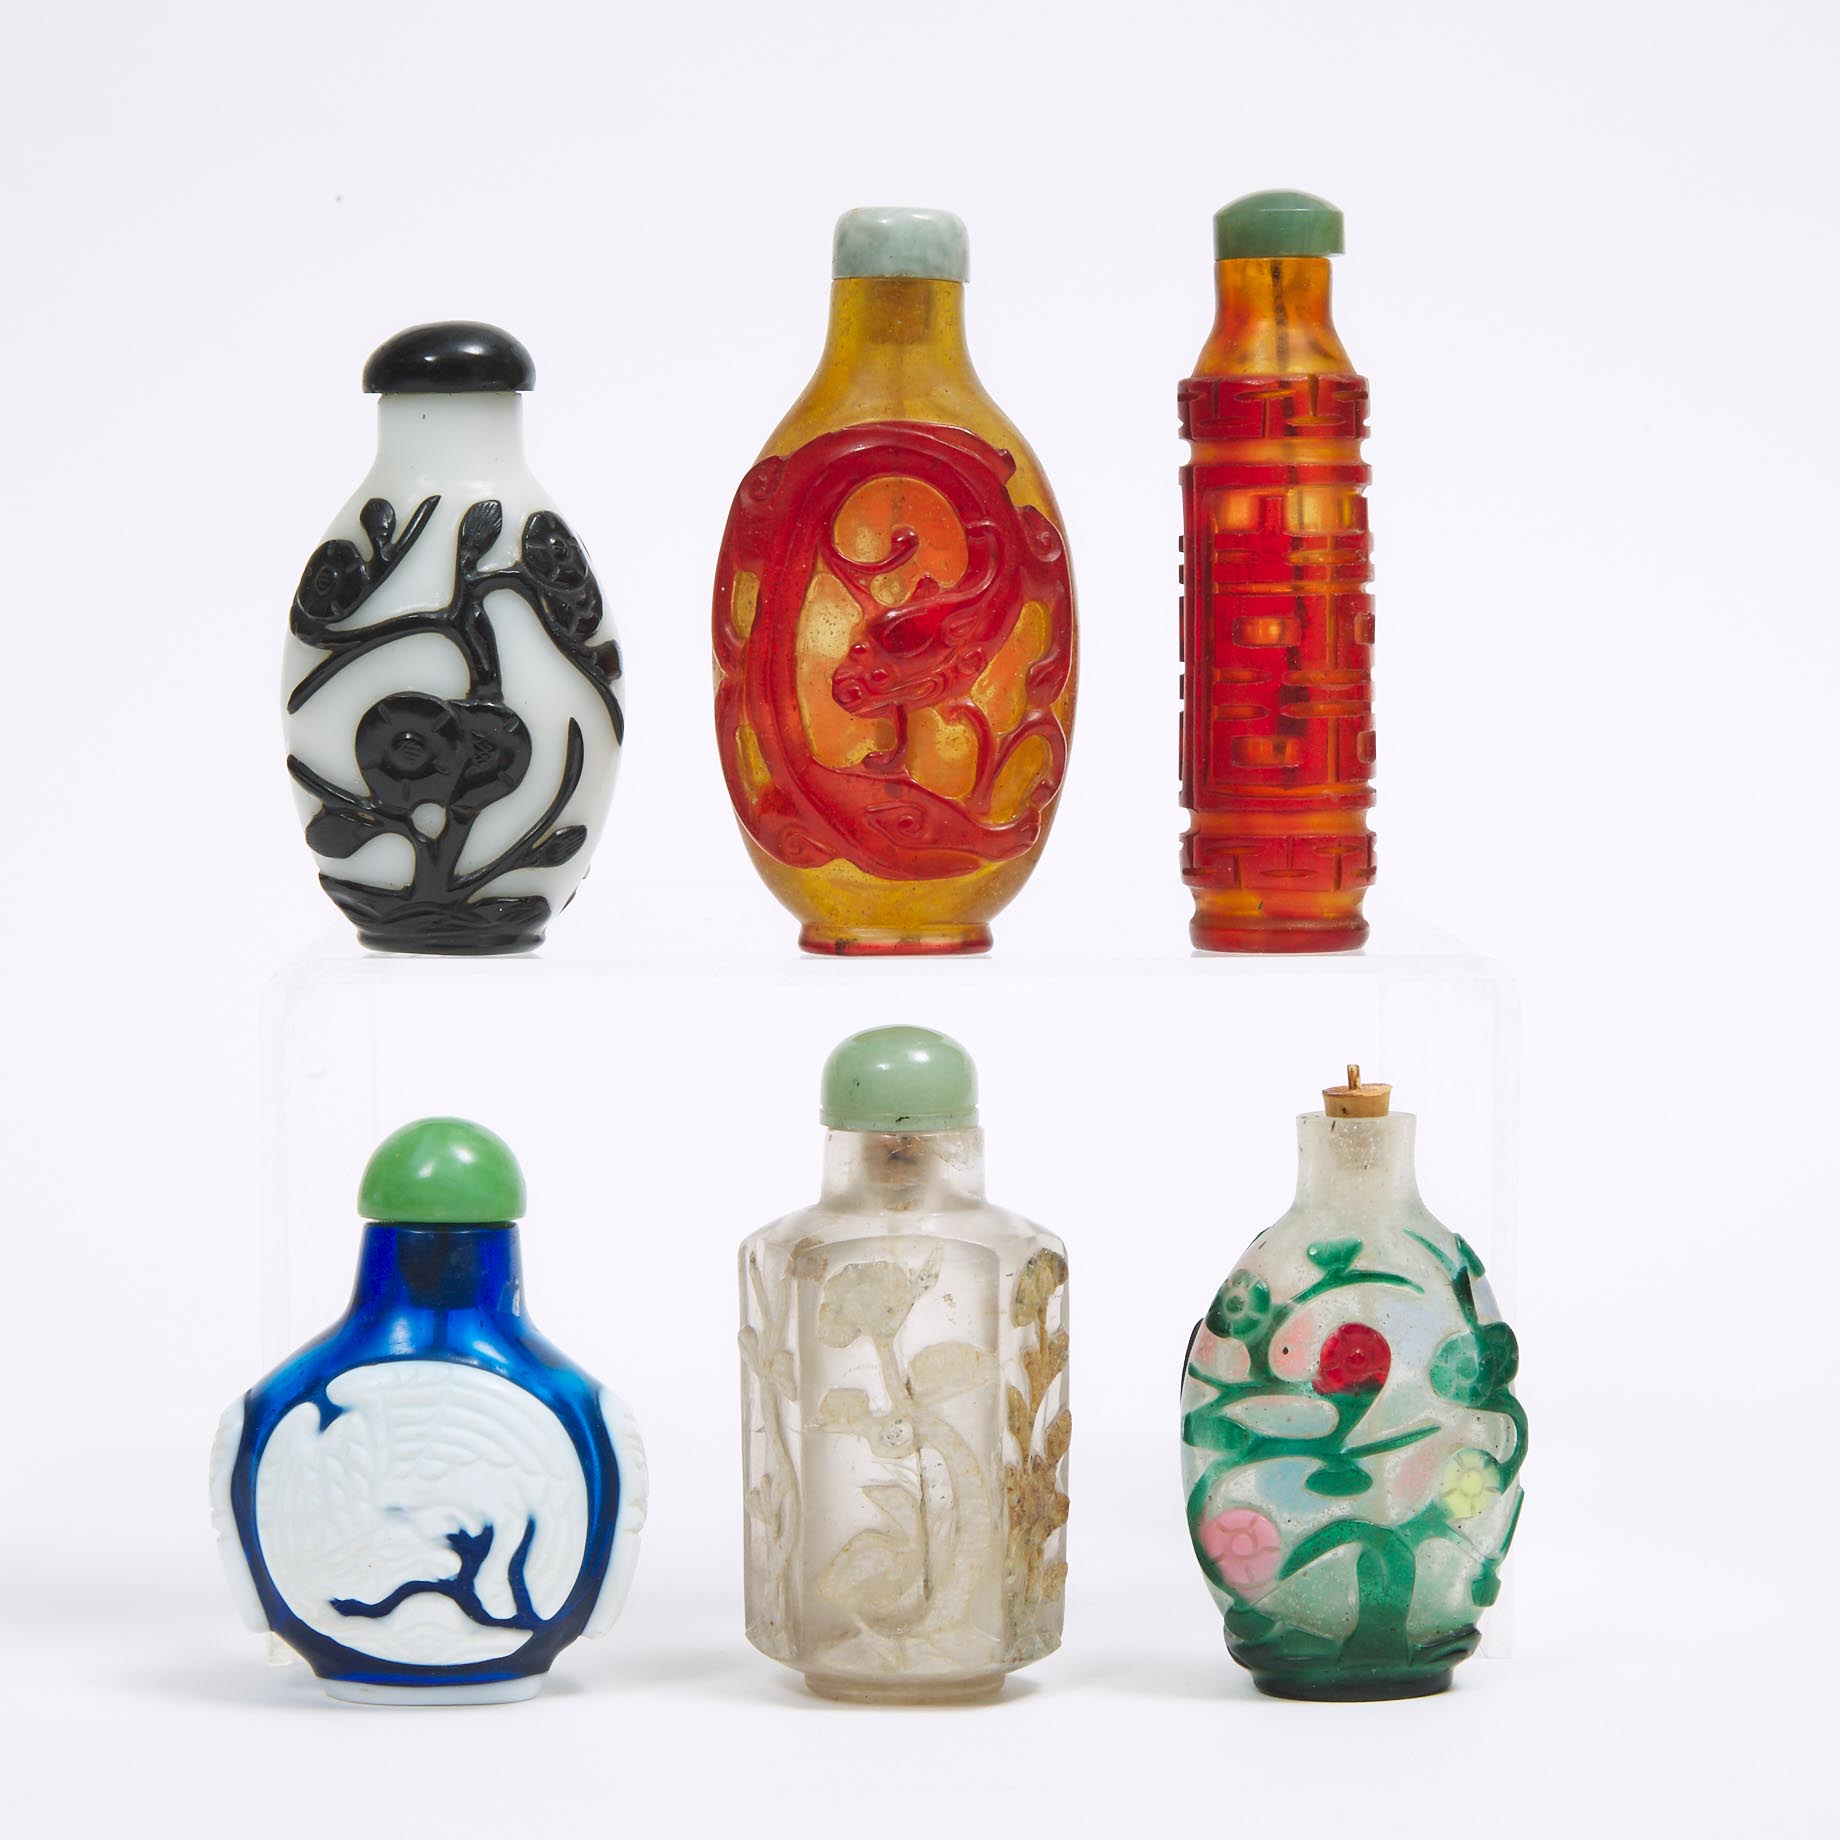 A Group of Five Overlay Glass Snuff Bottles, together with a Faceted Rock Crystal Snuff Bottle